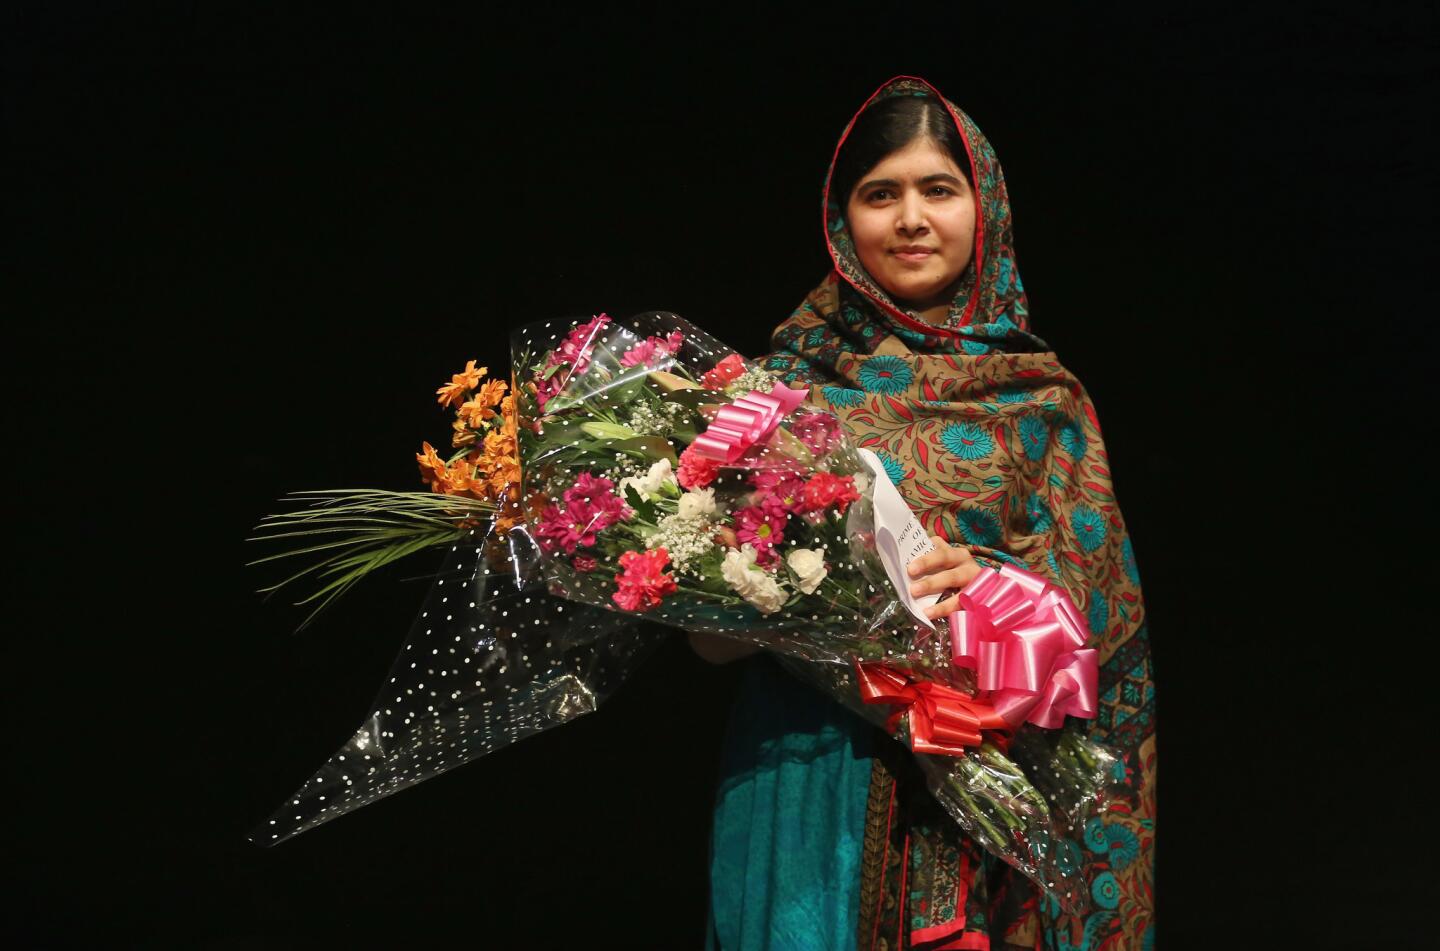 Malala Yousafzai holds a bouquet of flowers, given to her on behalf of the Pakistani Prime Minster during a press conference at the Library of Birmingham after being announced as a recipient of the Nobel Peace Prize, on October 10, 2014 in Birmingham, England.